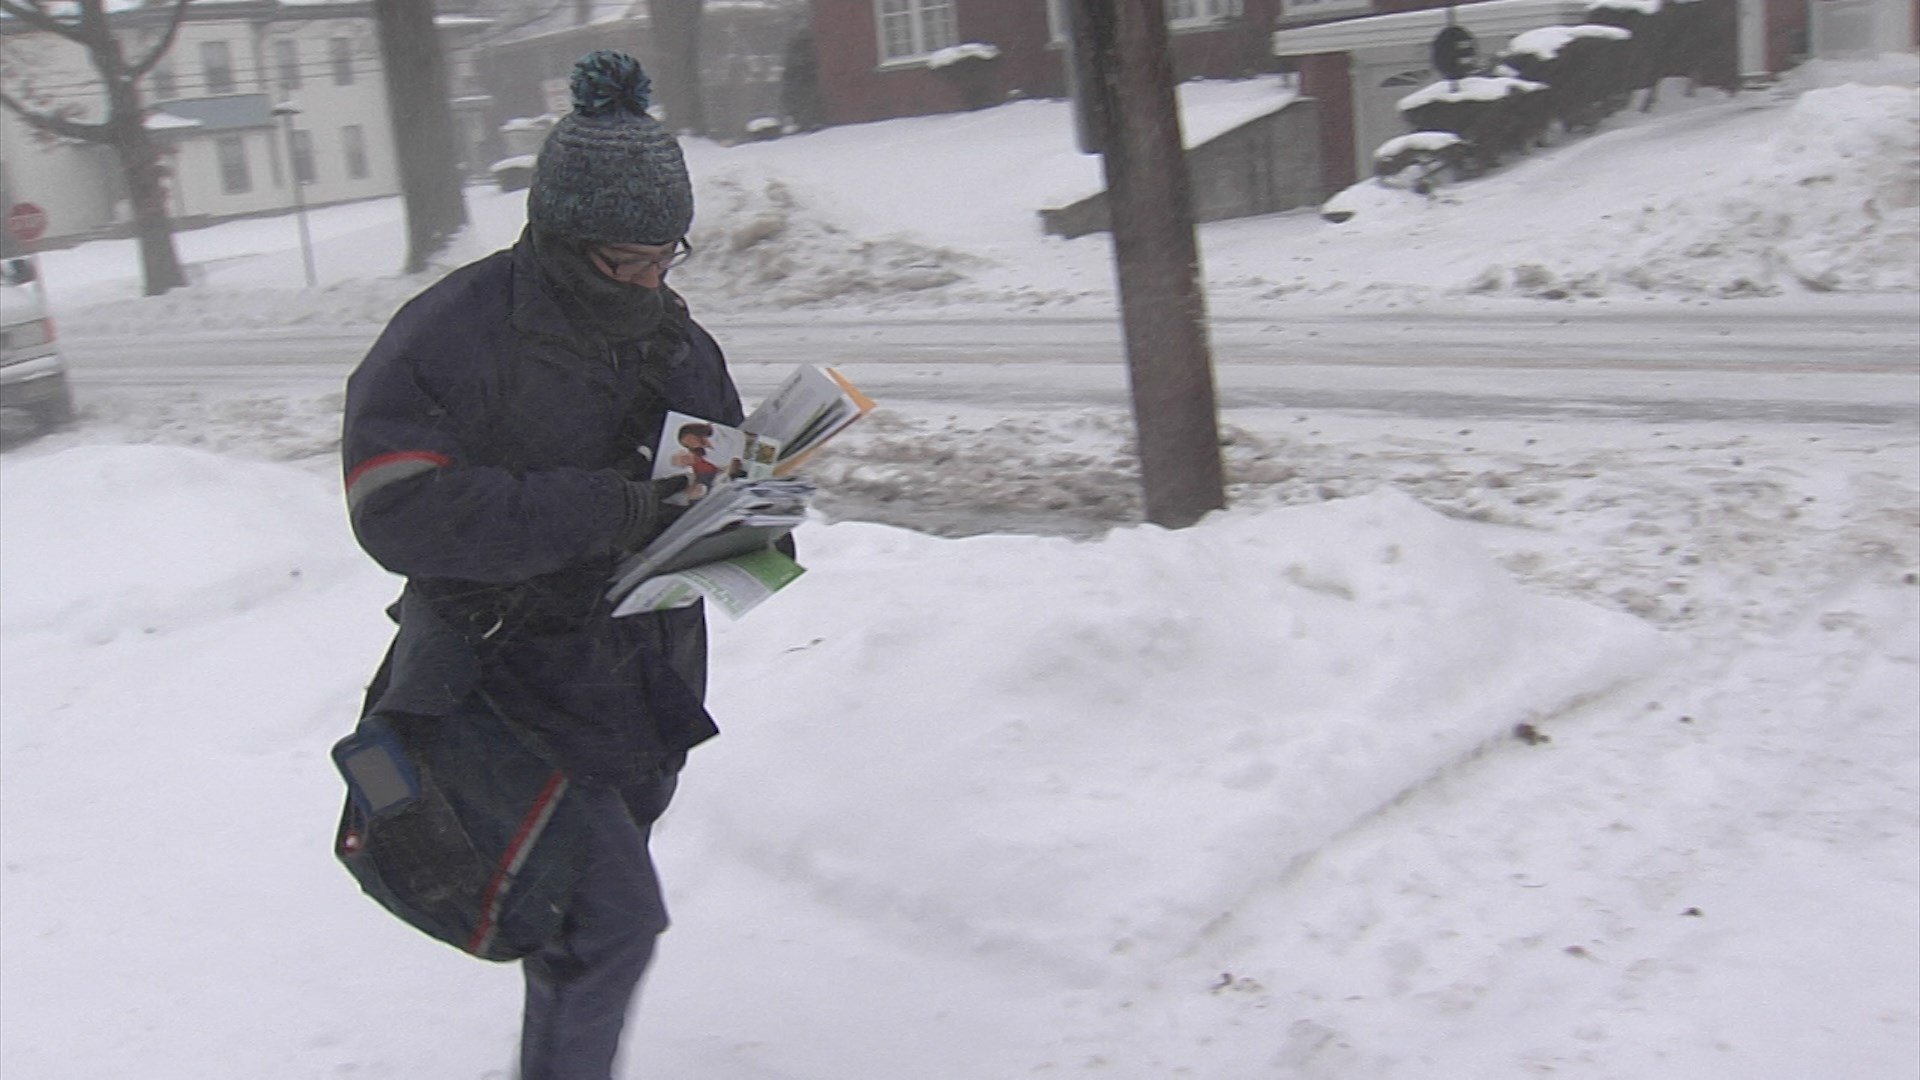 Erie Letter Carriers Not Complaining About Having to Work on This Frozen Day